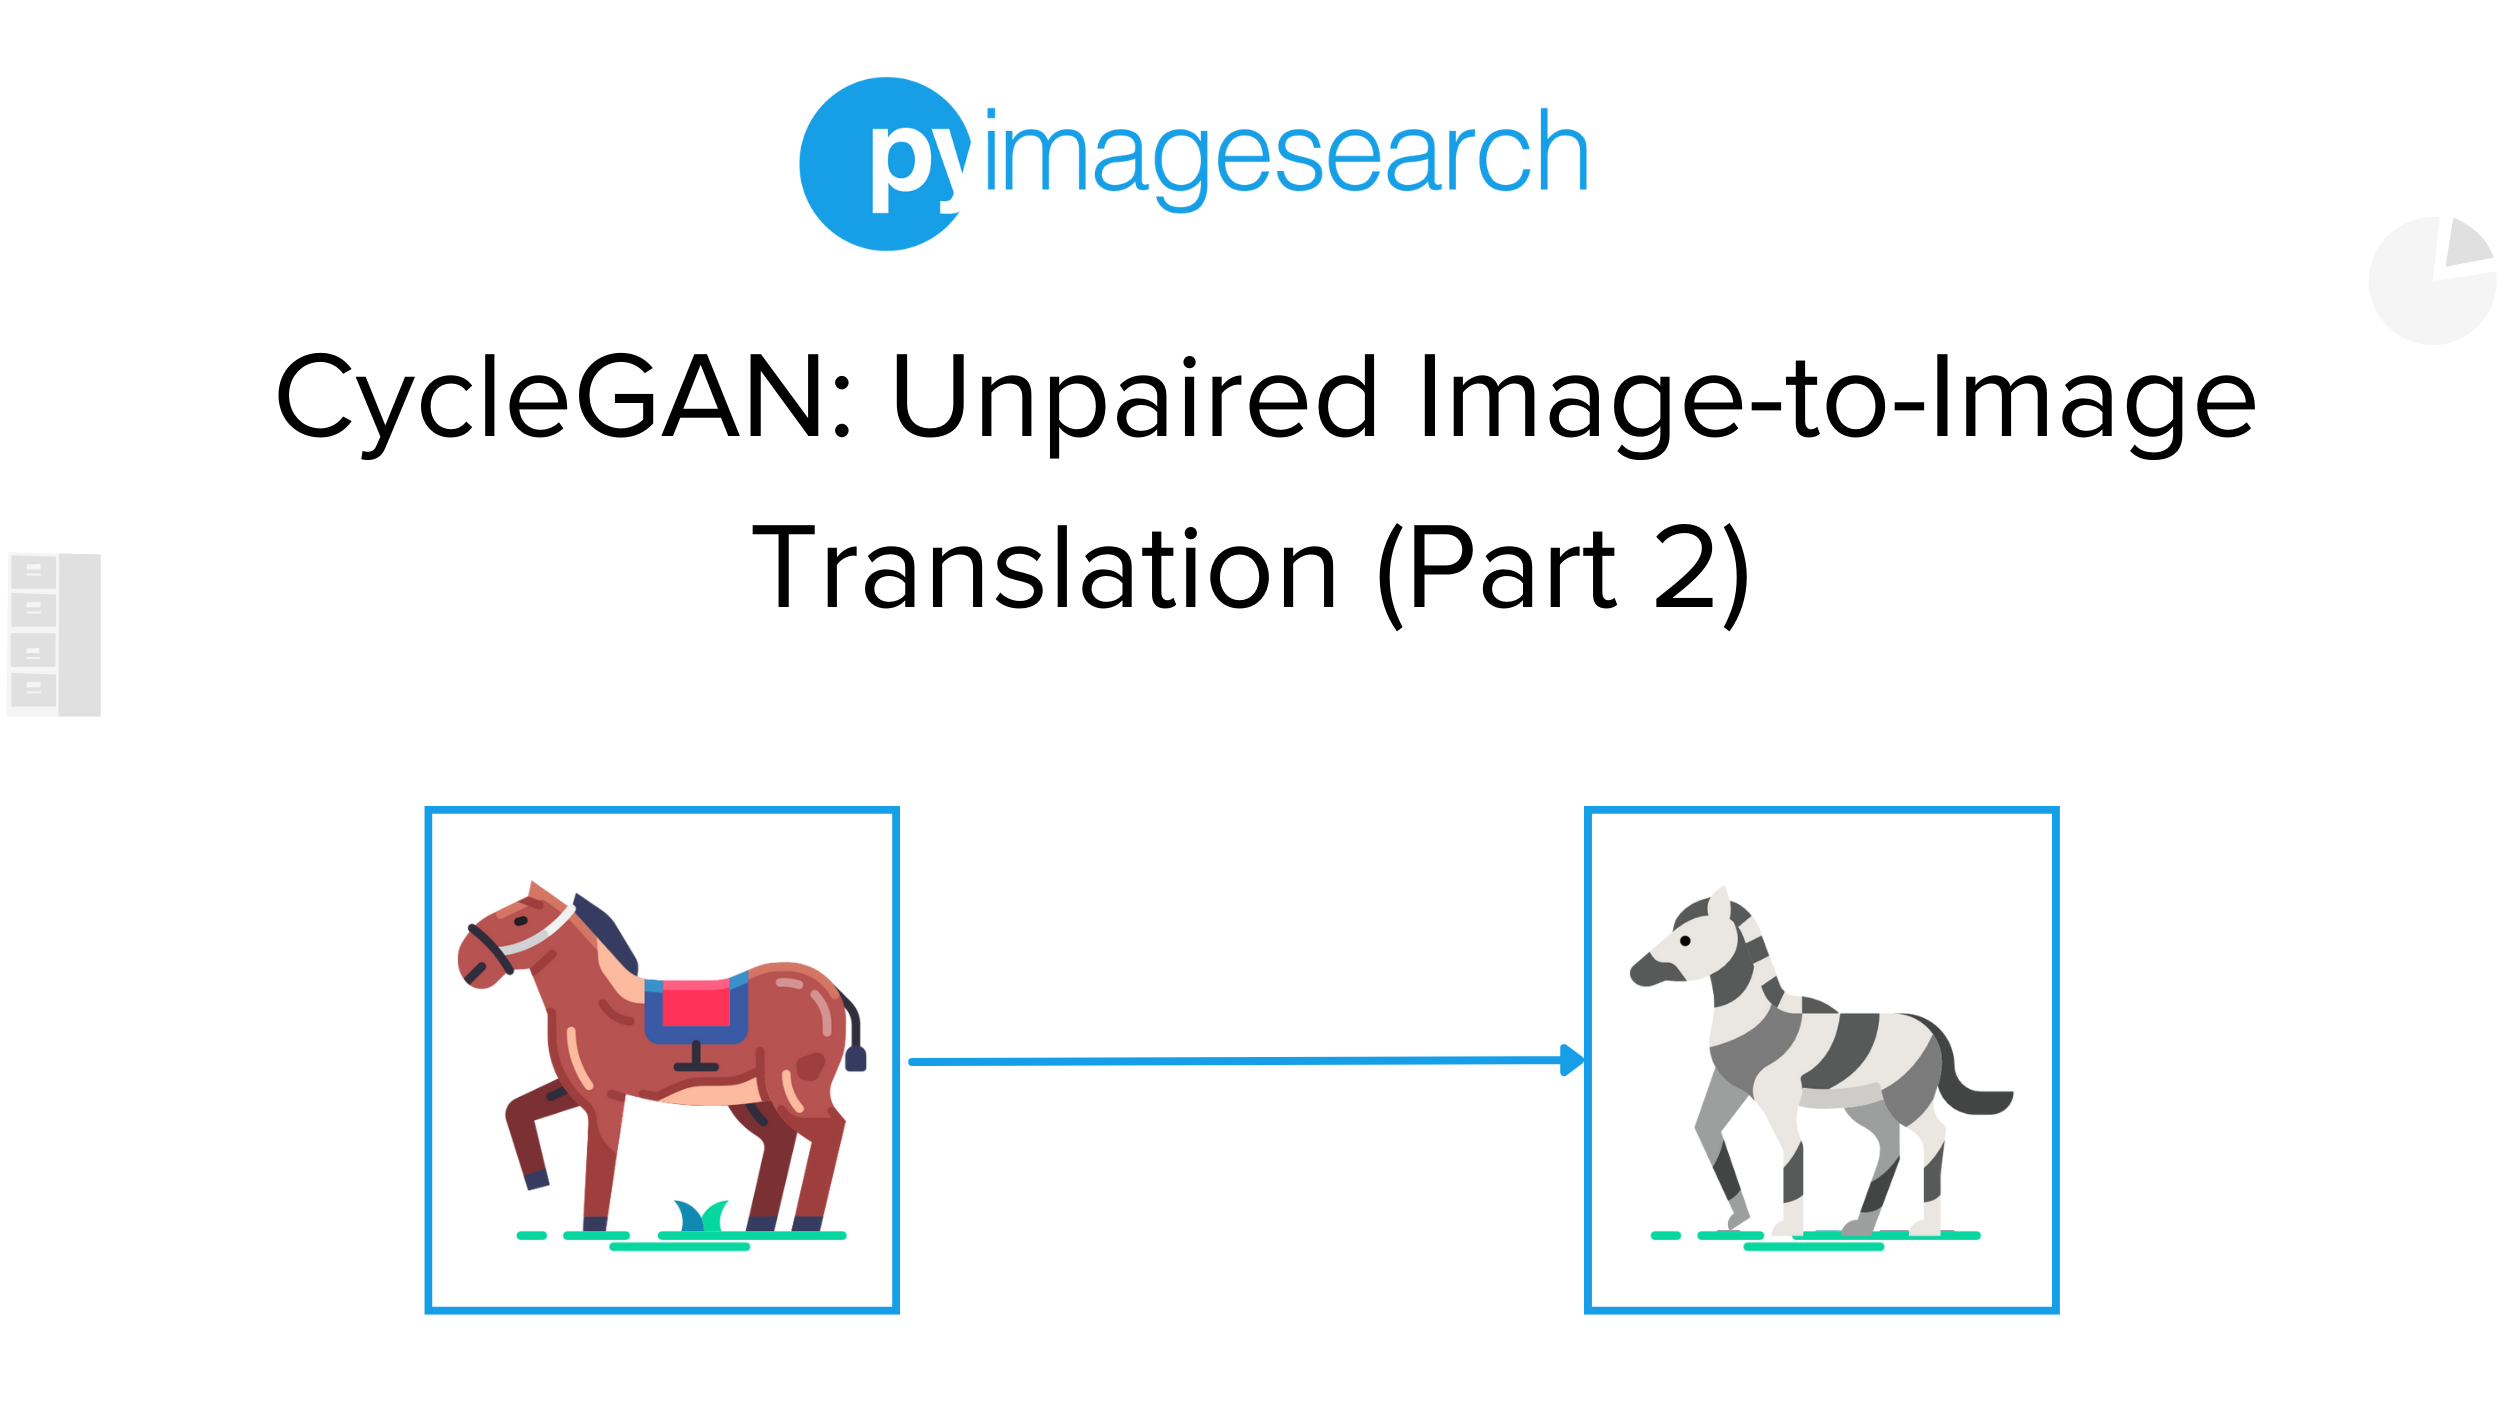 CycleGAN: Unpaired Image-to-Image Translation (Part 2)